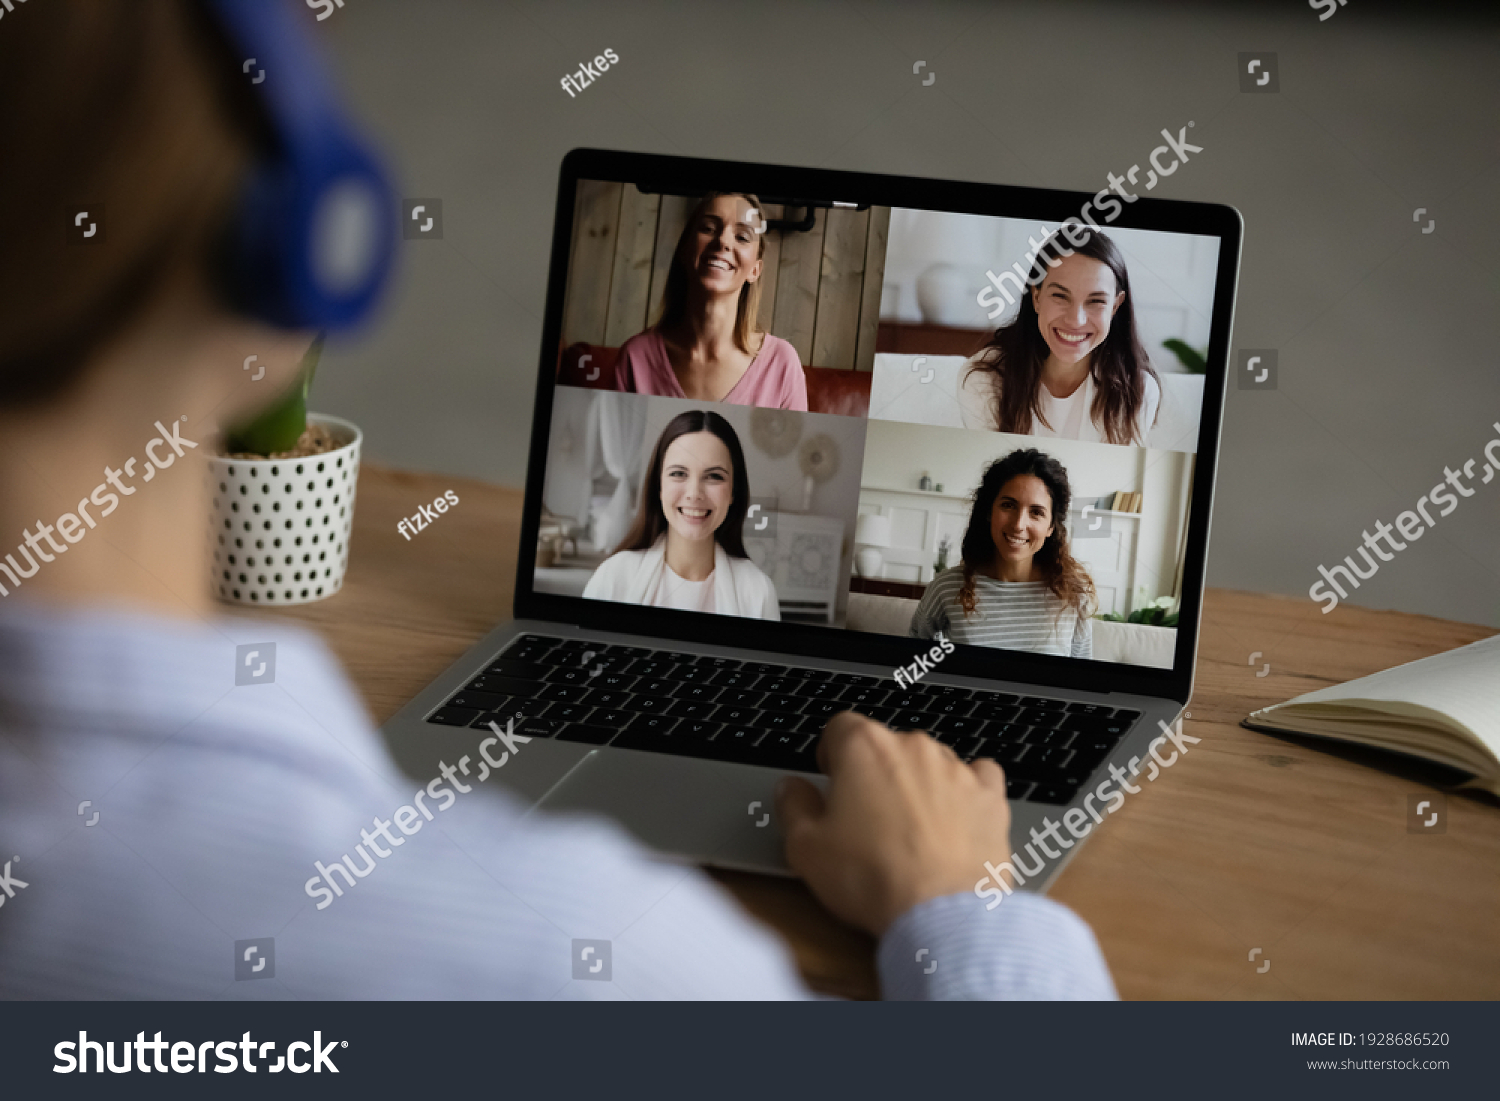 Over shoulder view of woman use laptop have pleasant webcam online conversation with diverse girlfriends. Female talk speak on video call with friends, laugh meeting on web. Virtual event concept. #1928686520